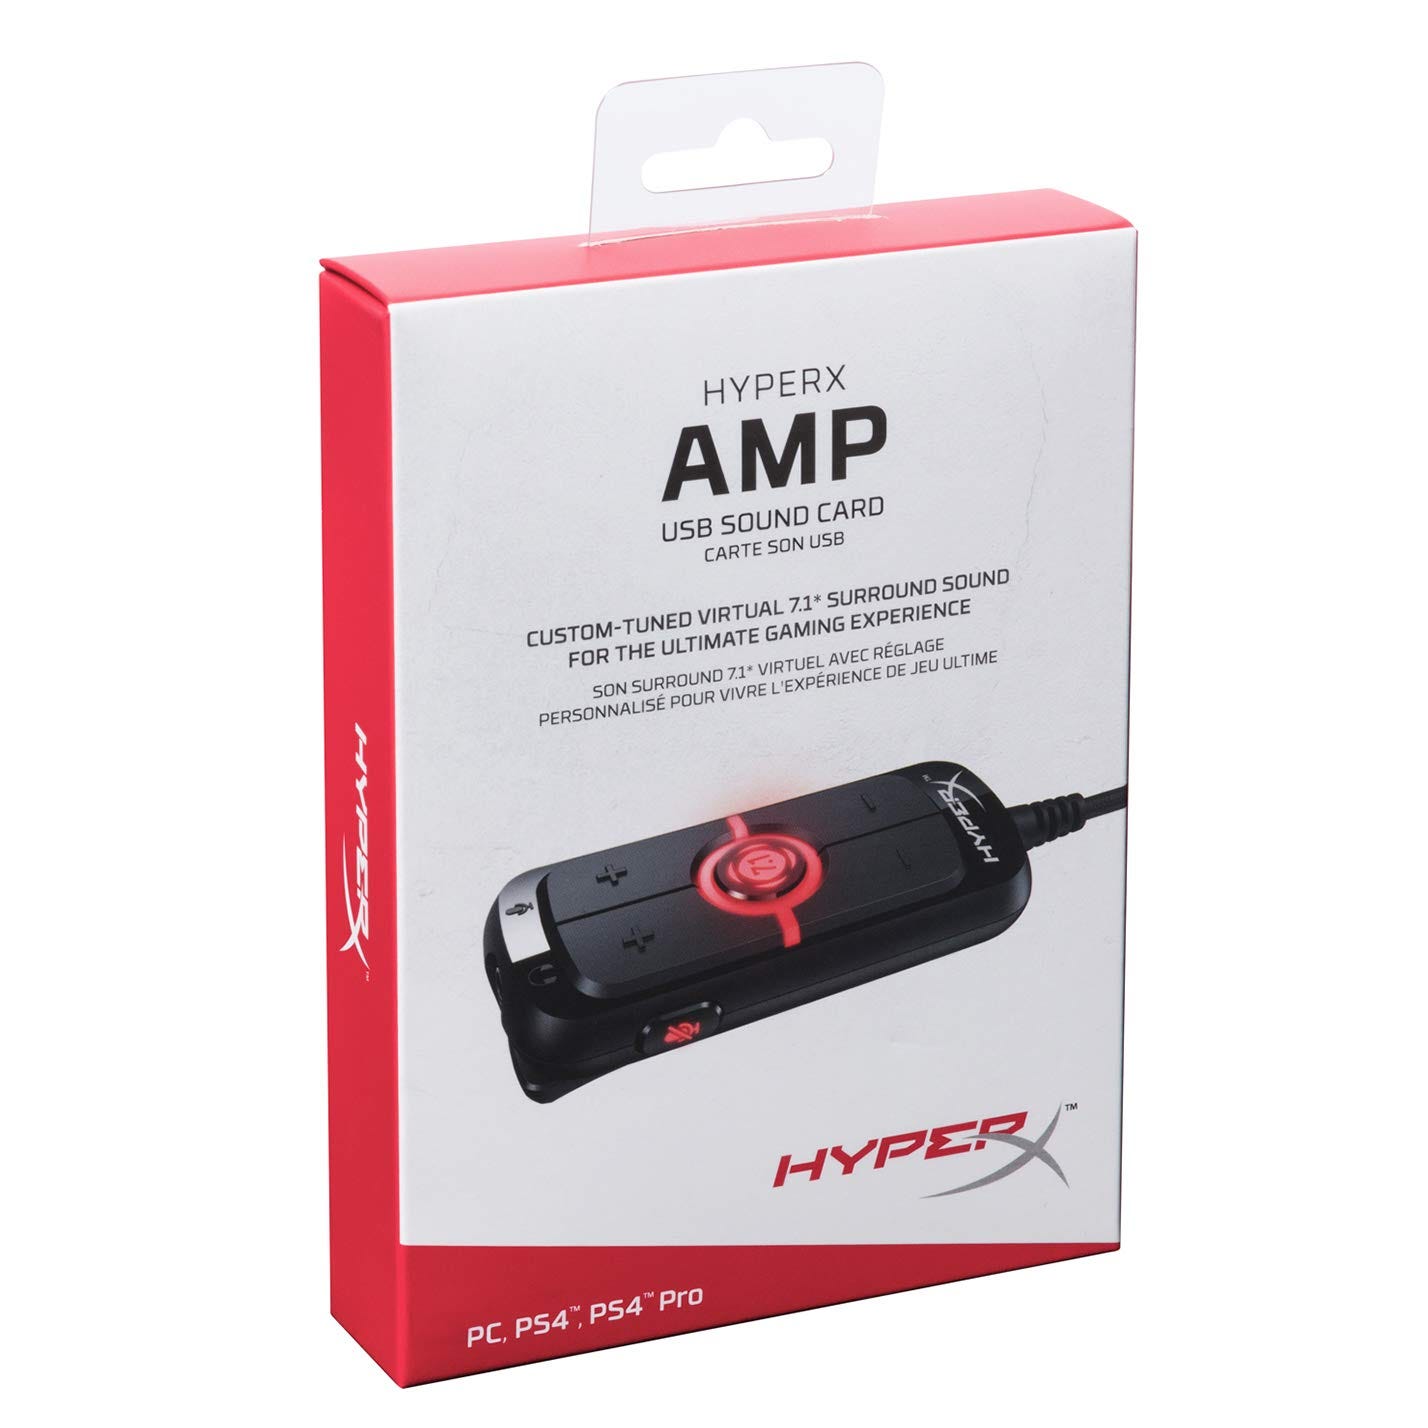 Hyperx Amp Usb Sound Card Review It S Like A Cloud Ii Dongle But Not By Alex Rowe Medium